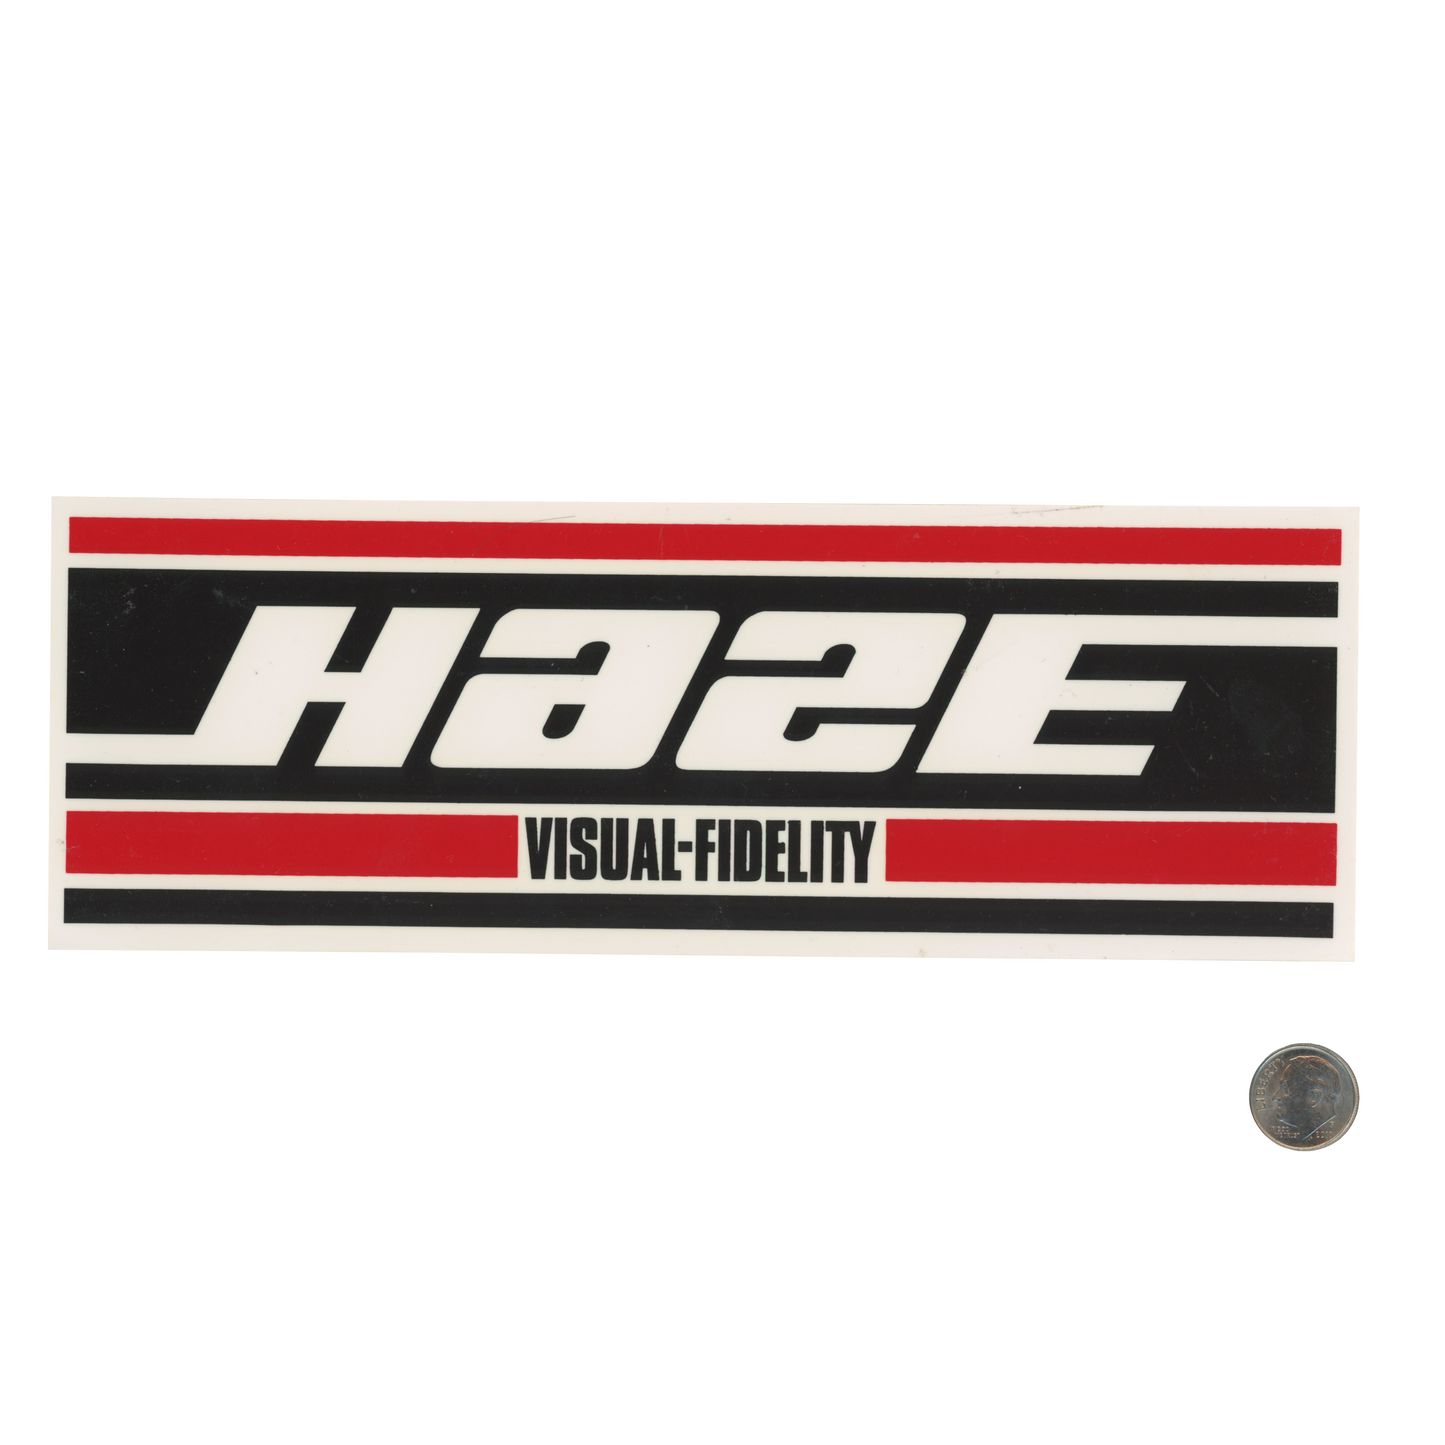 Eric HAZE VISUAL FIDELITY Red Black Sticker with dime